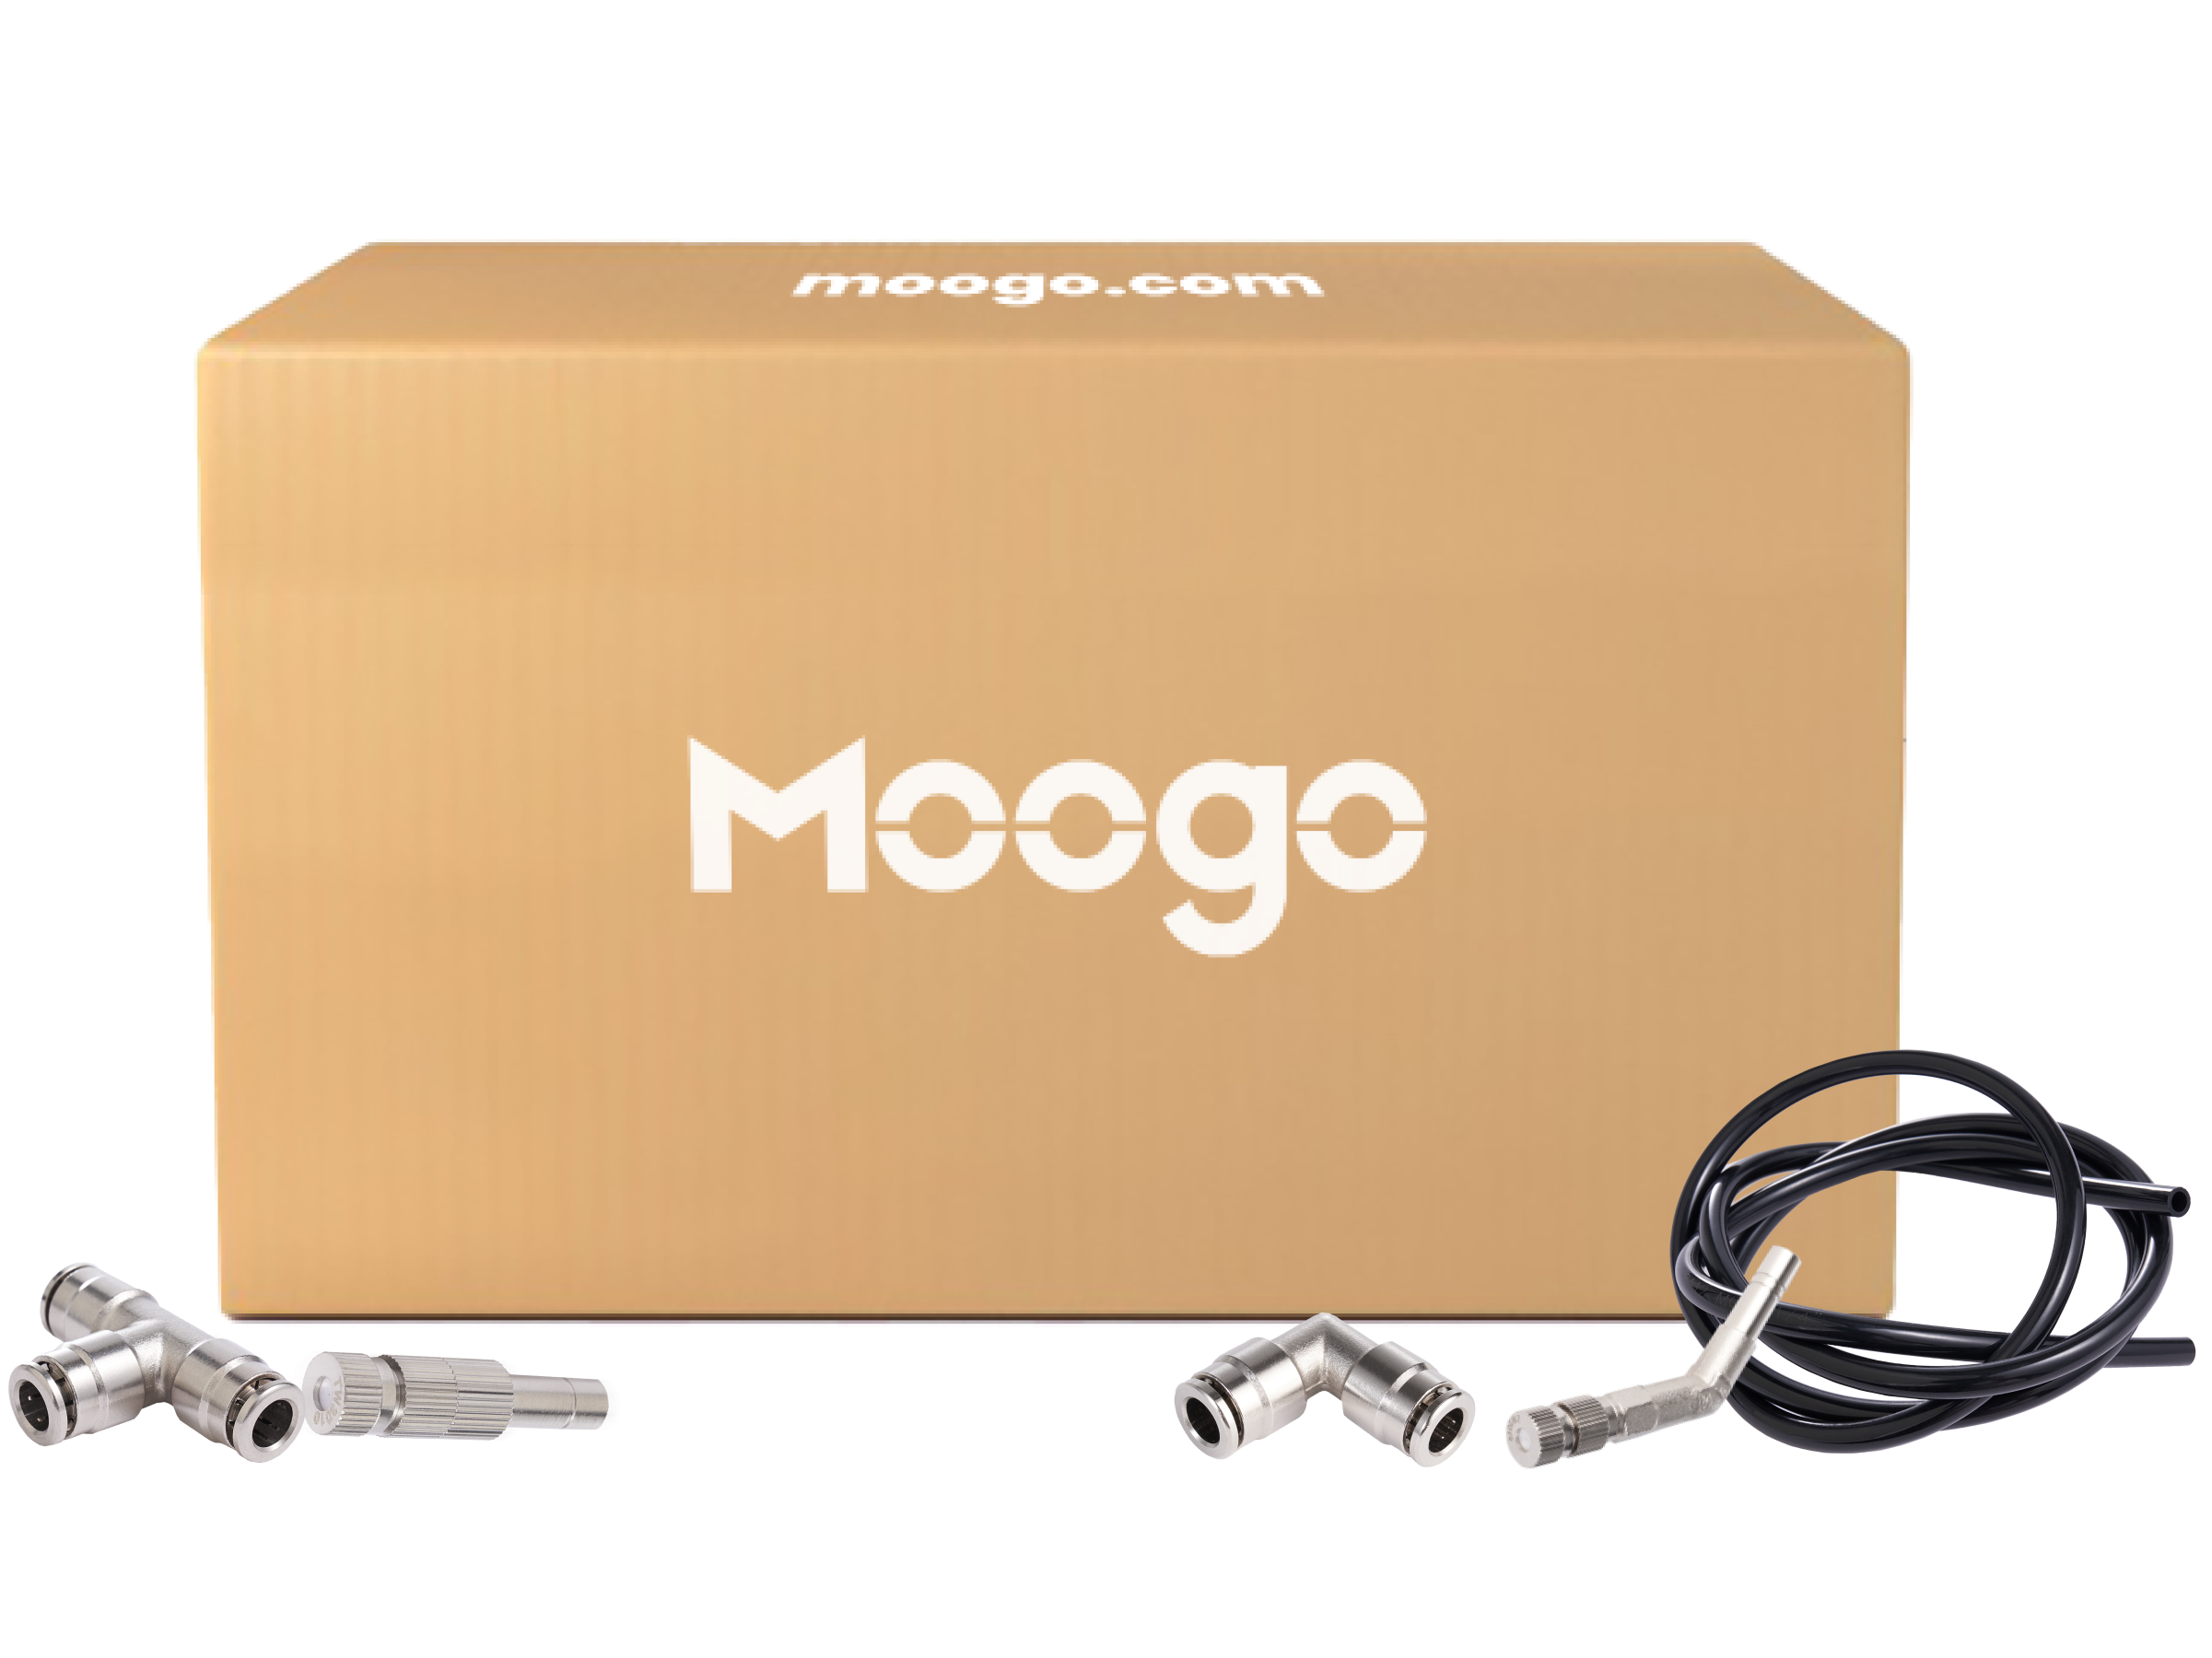 Moogo equipment and accessories package